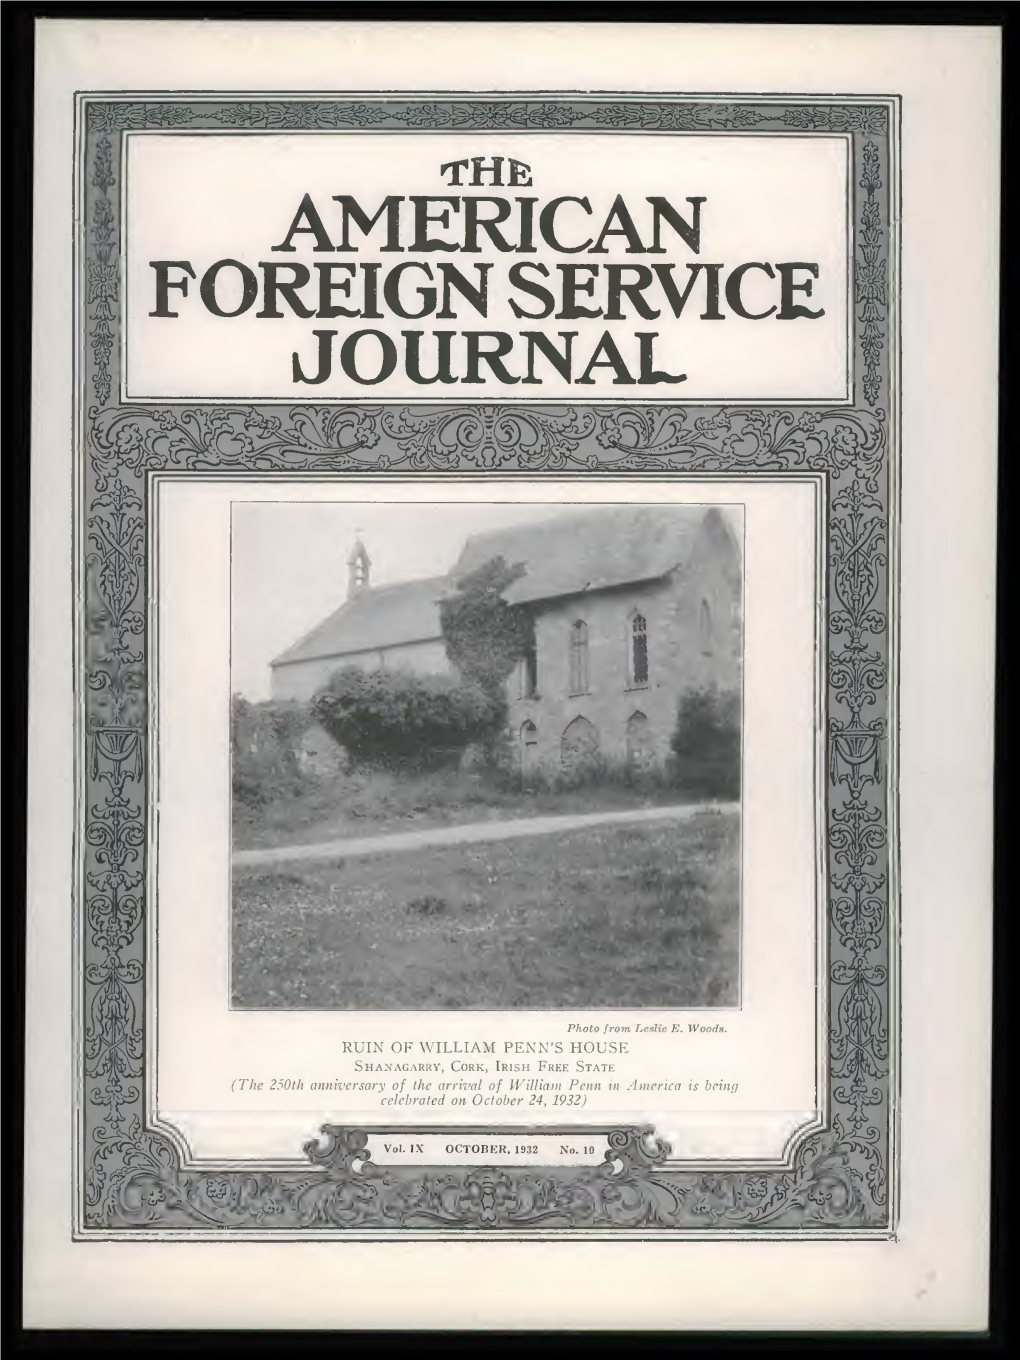 The Foreign Service Journal, October 1932